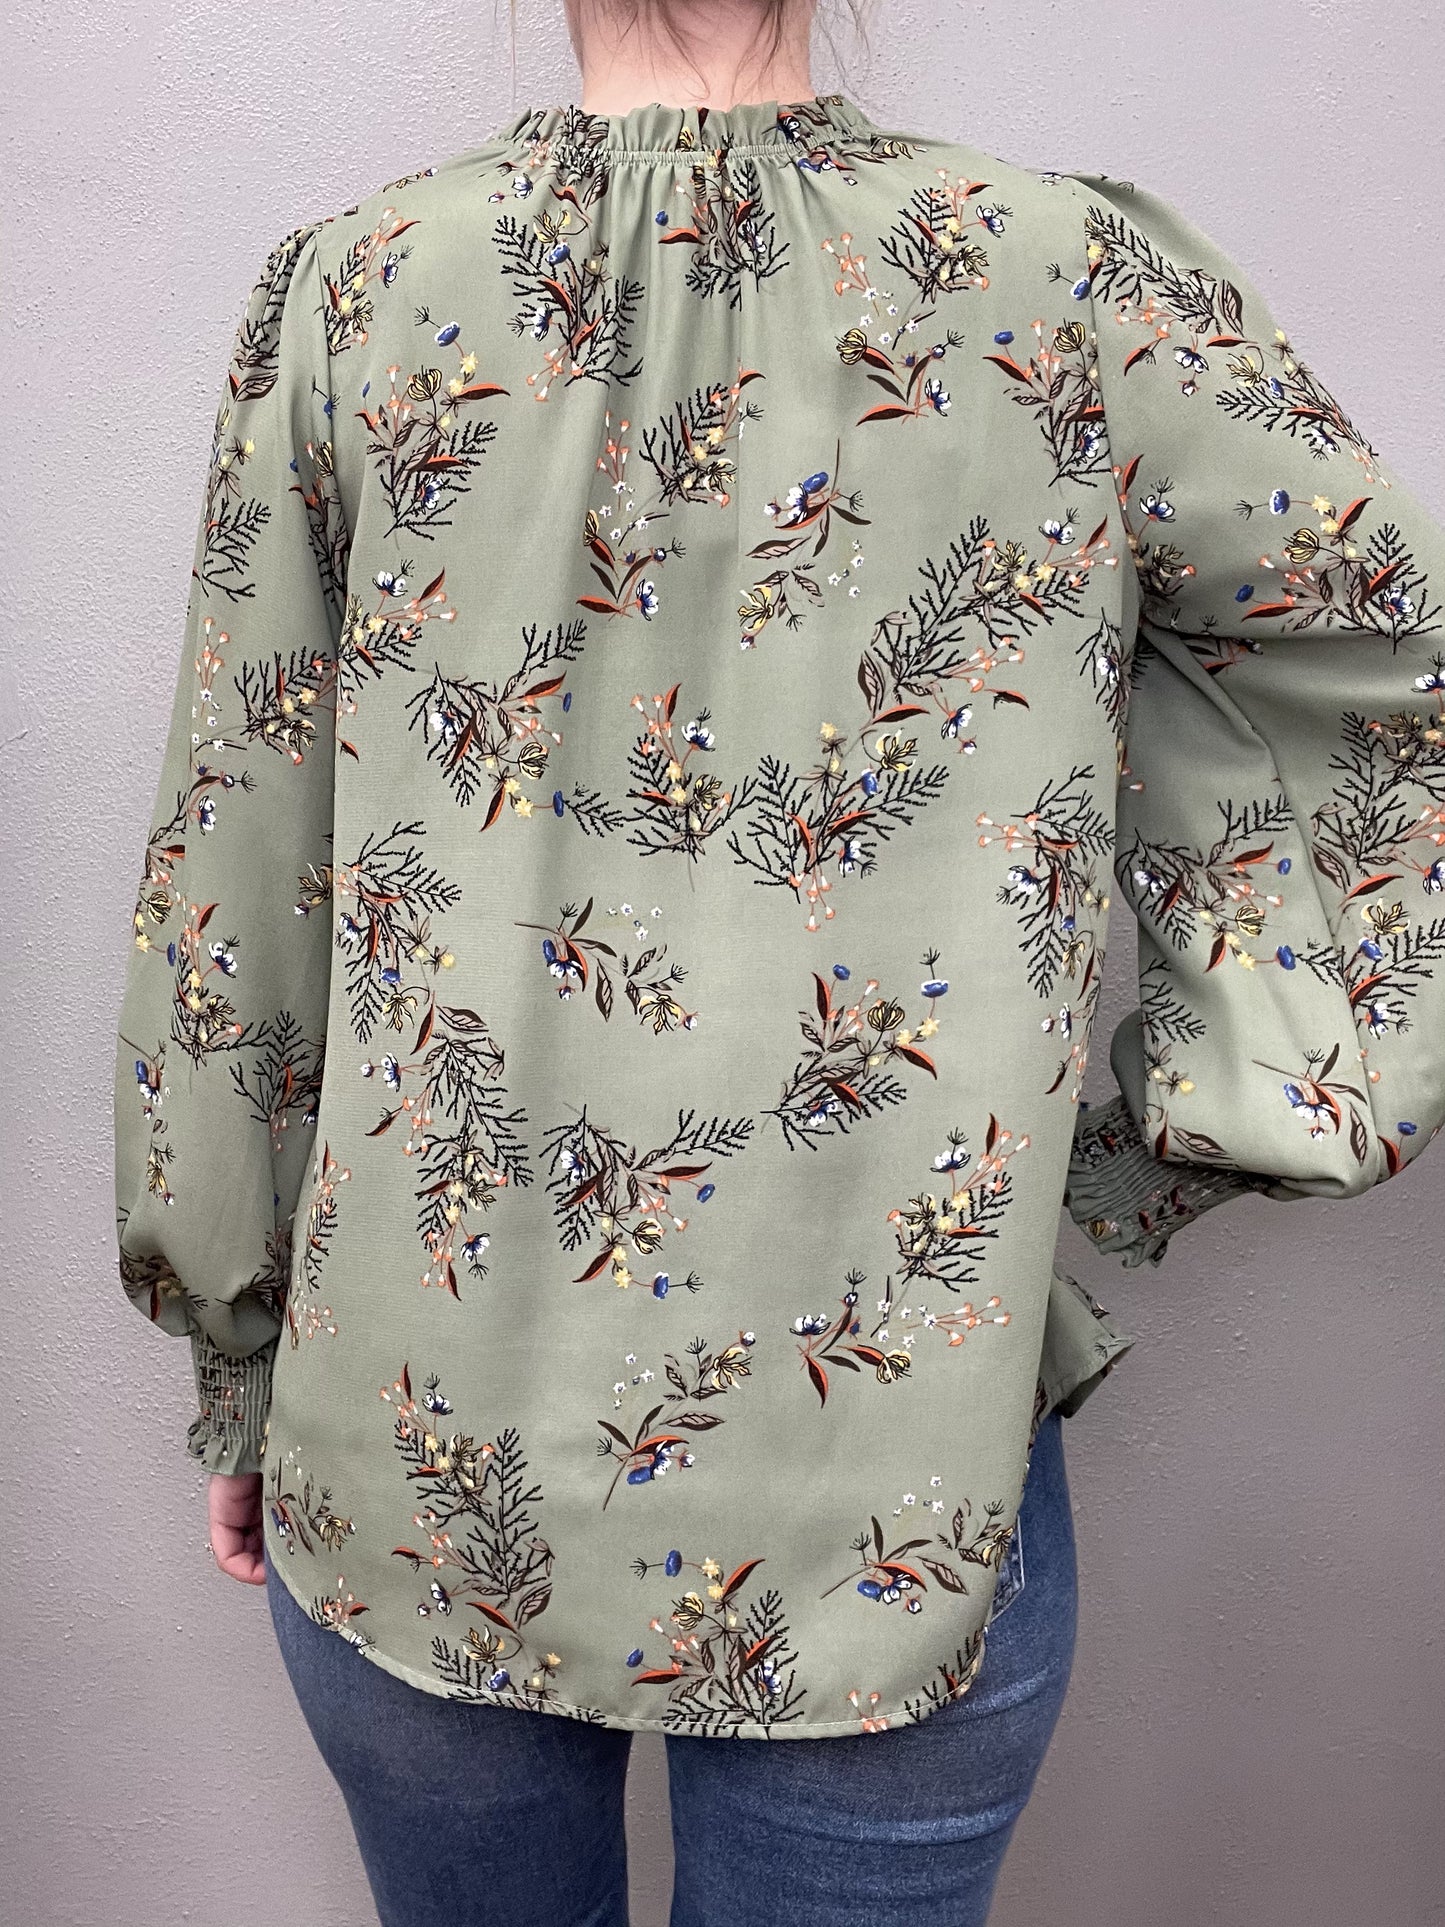 HAILEY & CO SMOCKED FLORAL TOP - SAGE